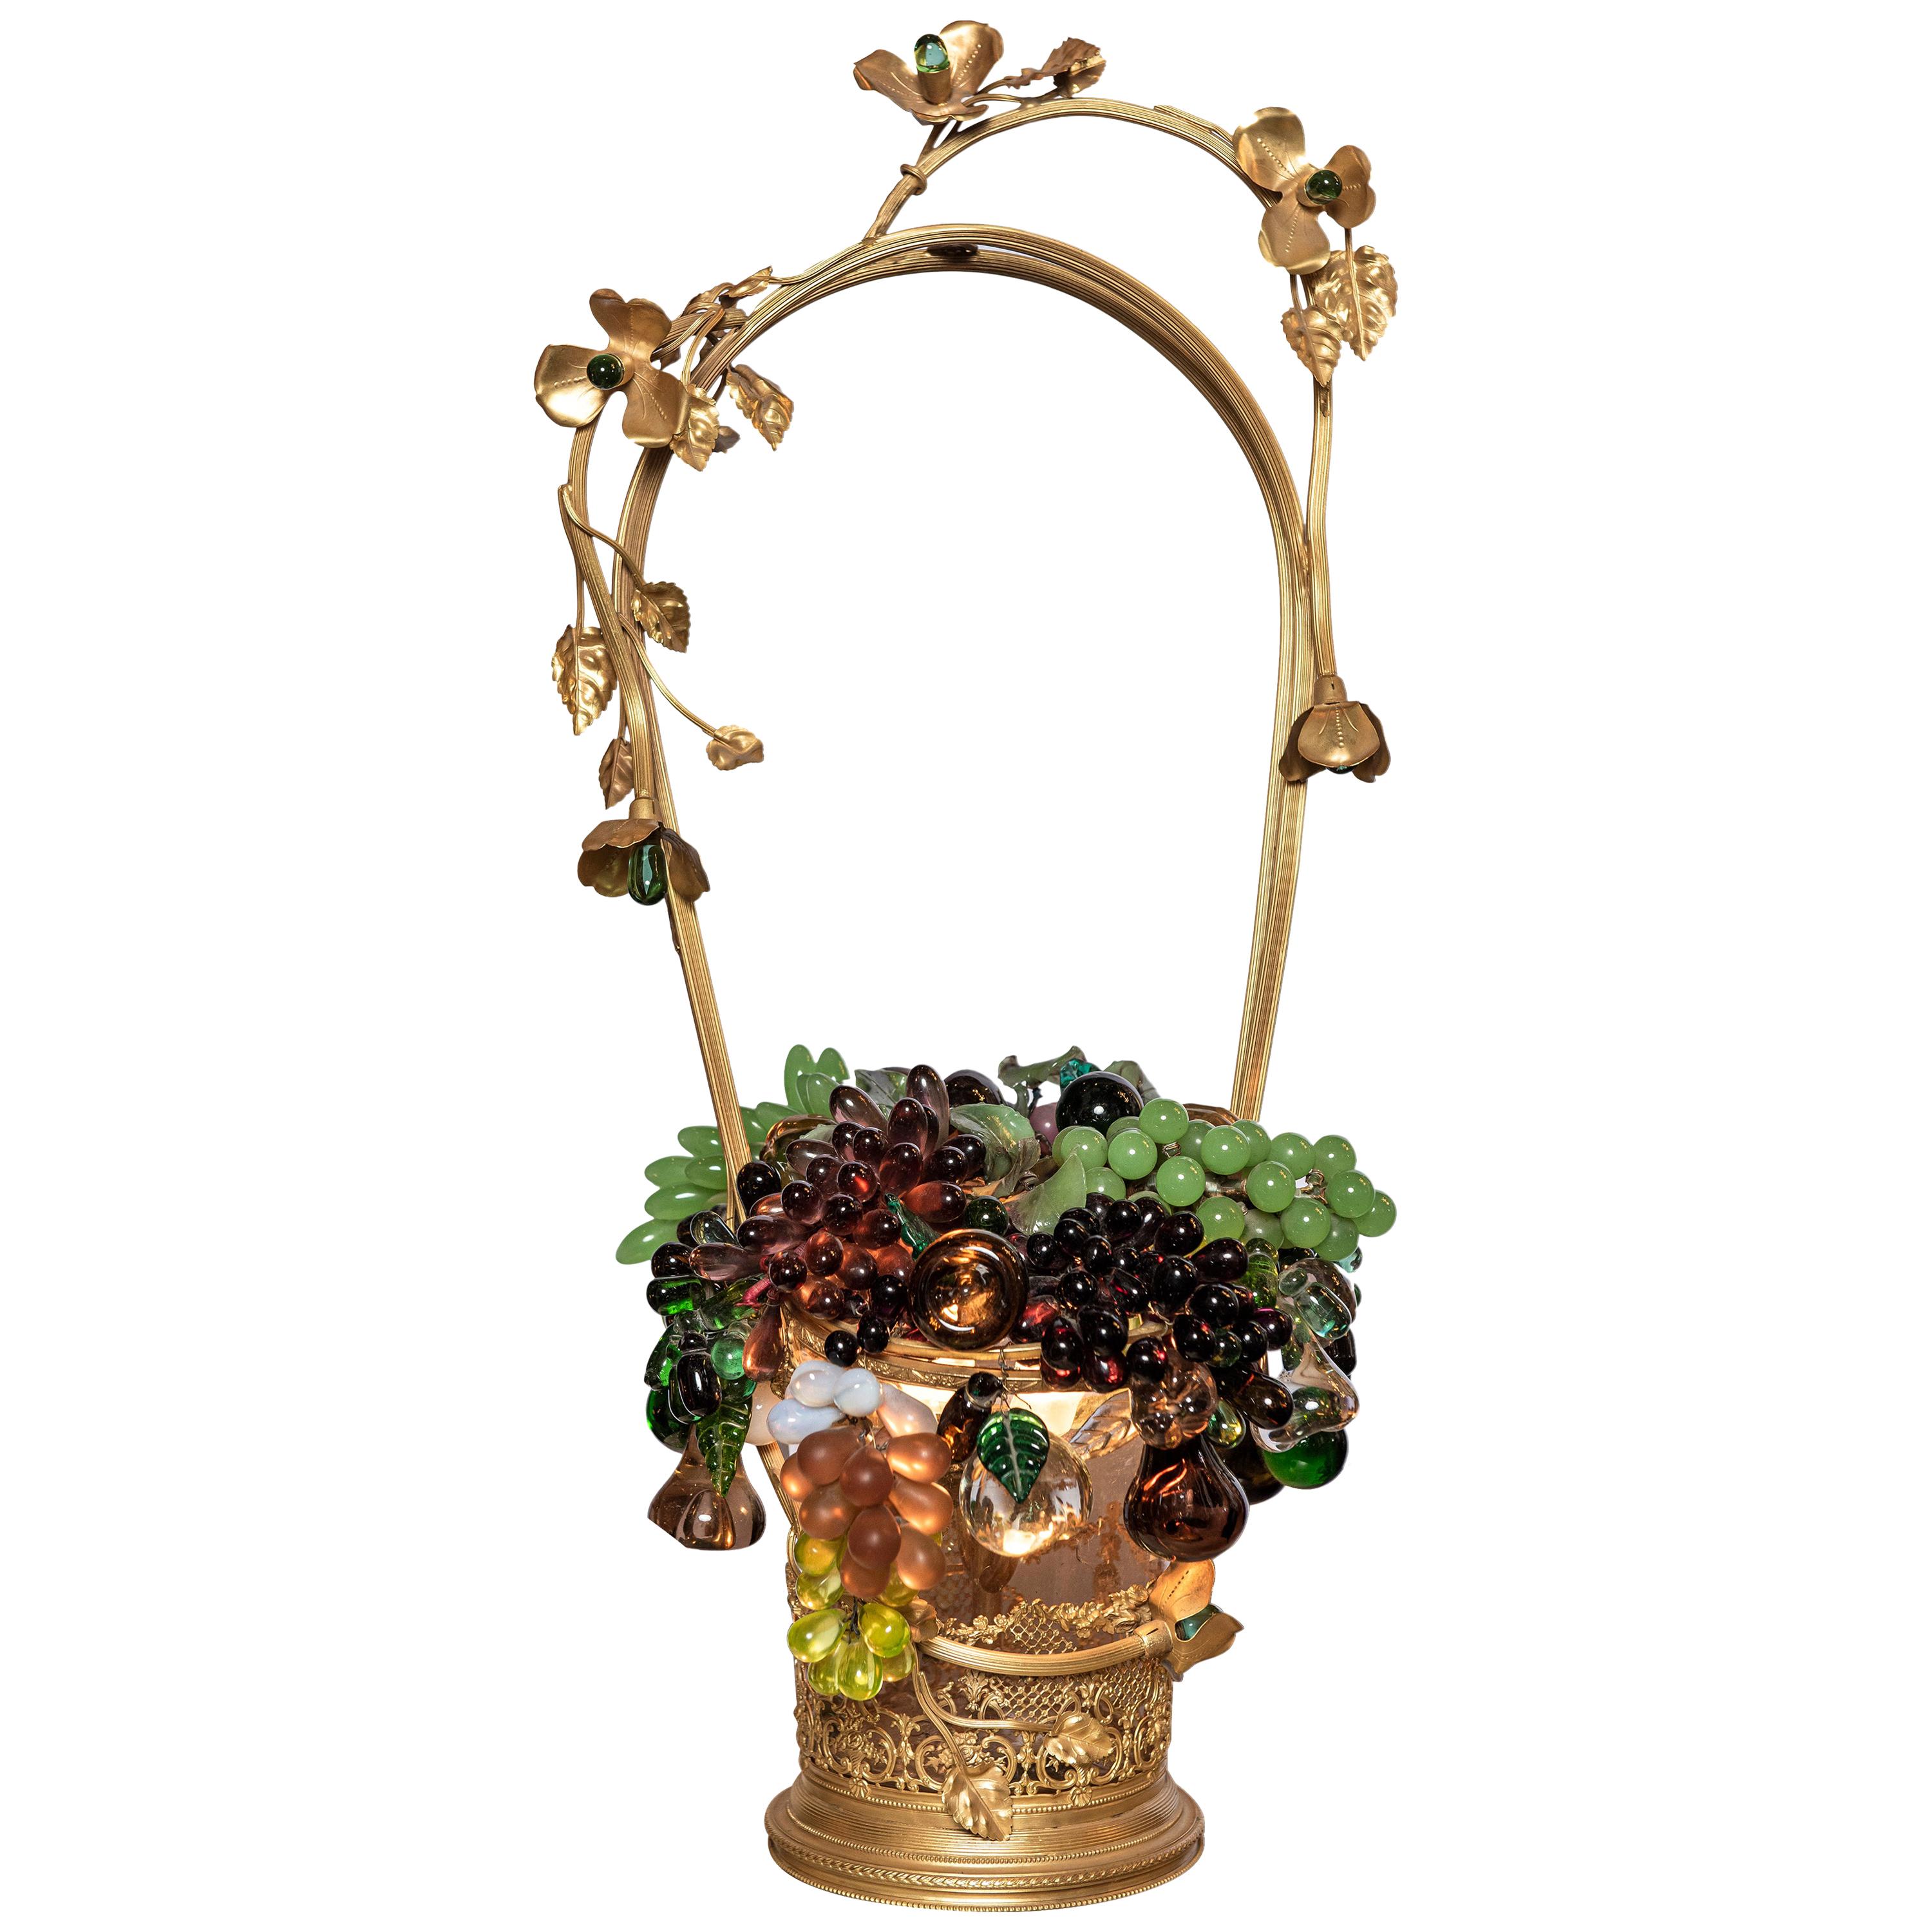 Czech Colored Glass and Bronze Fruit Basket Table Lamp. Circa 1890. 